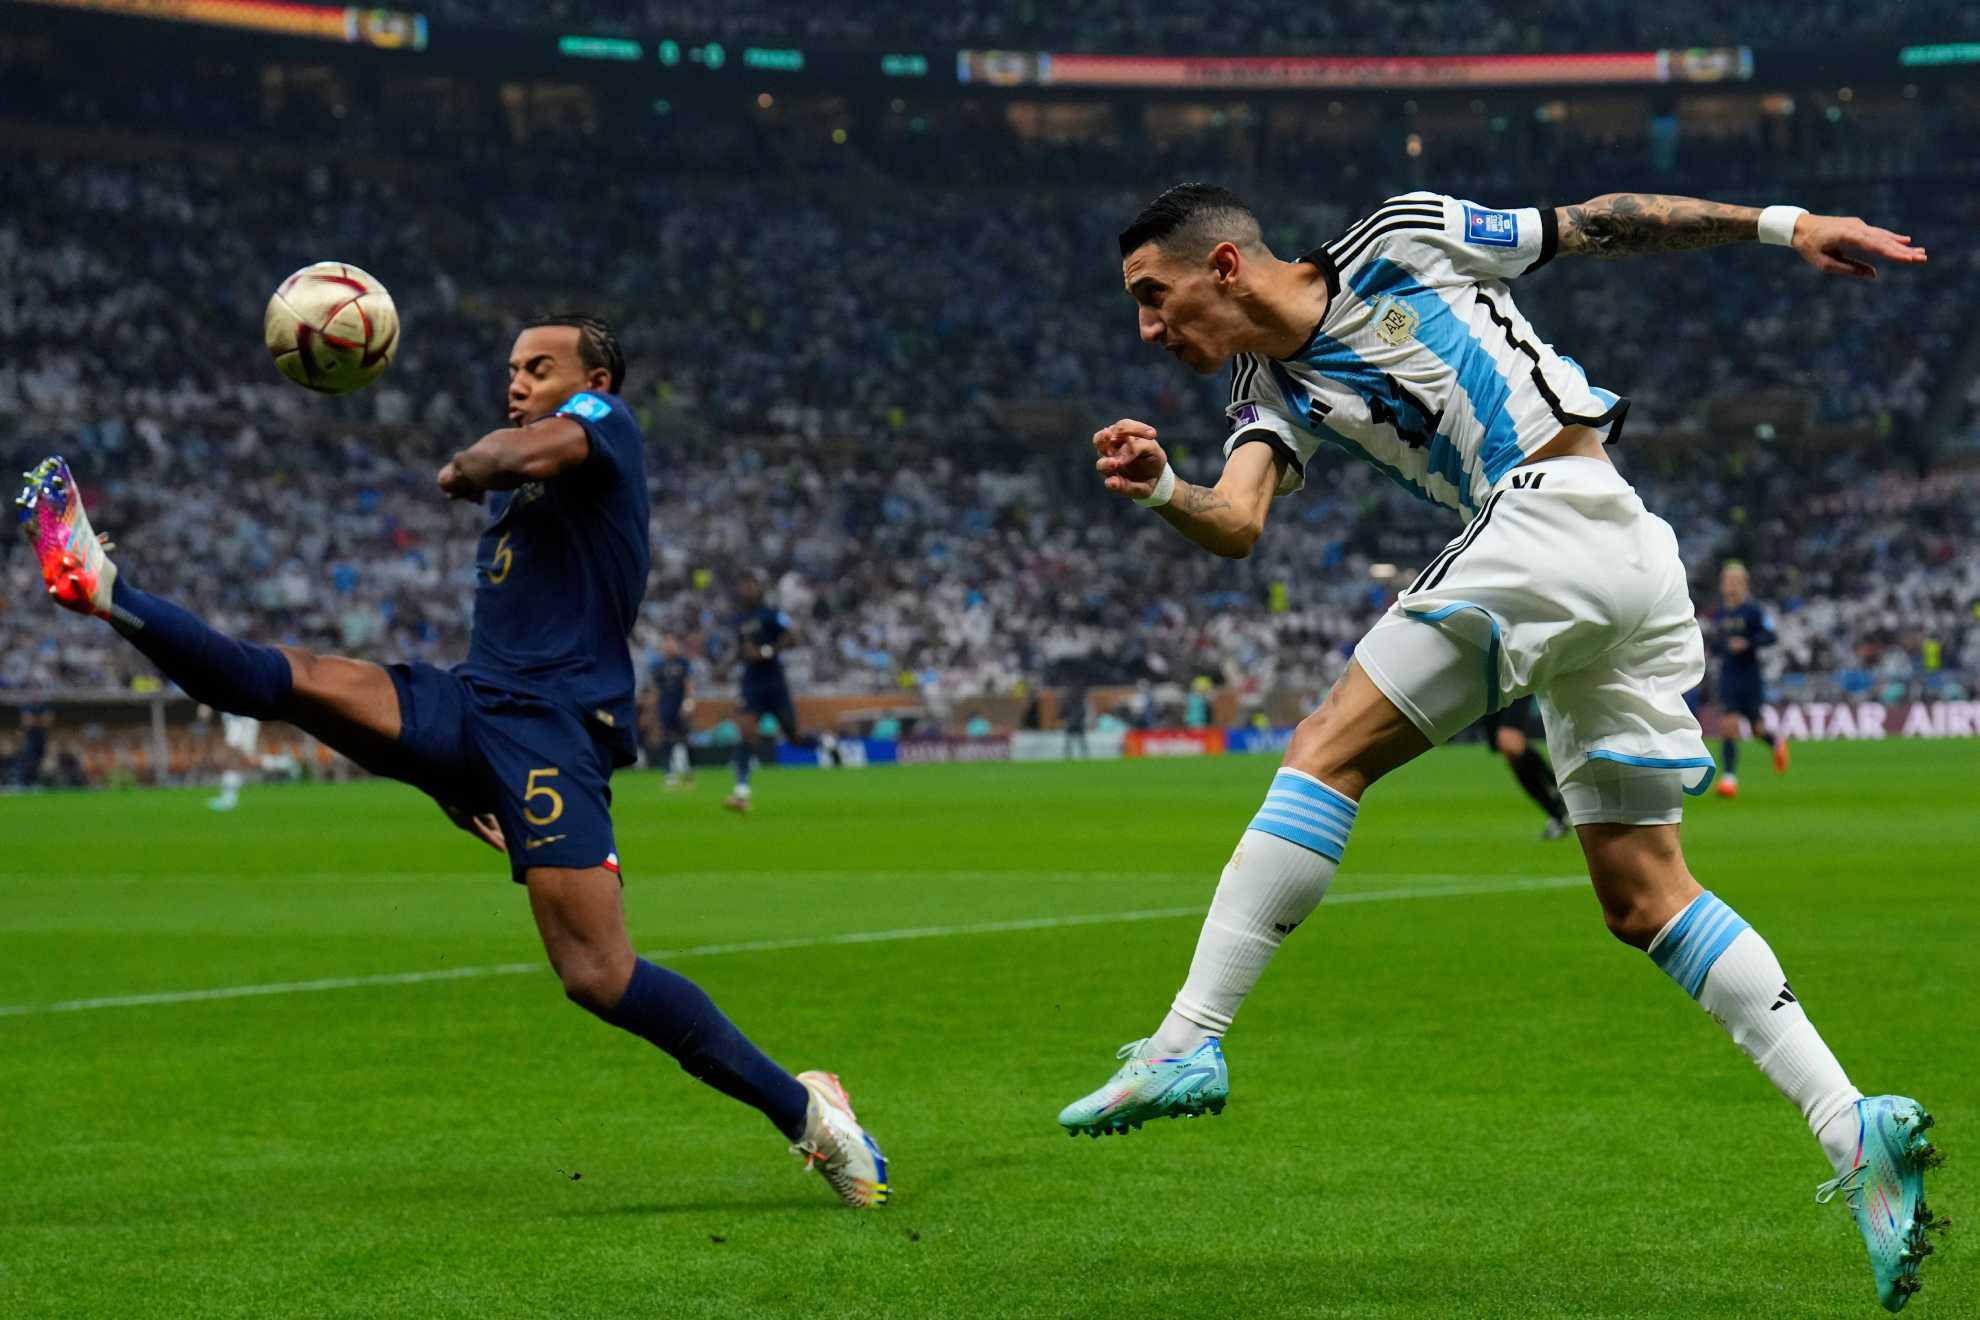 Why Argentina's win over France was the greatest World Cup final ever